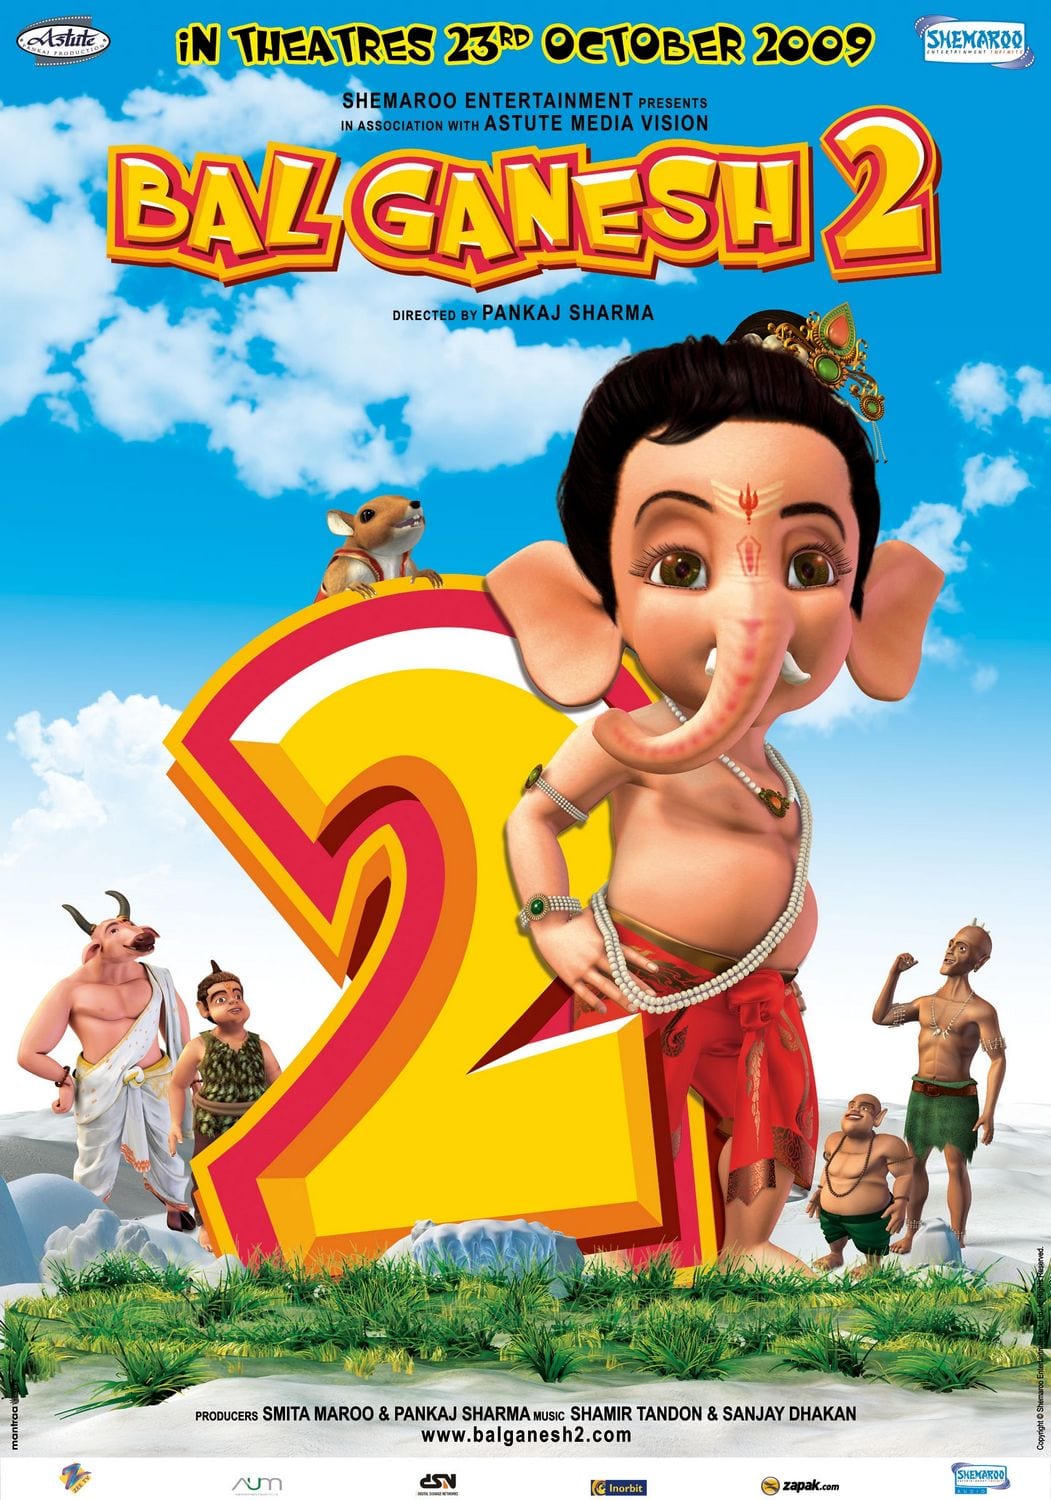 Poster for the movie "Bal Ganesh 2"